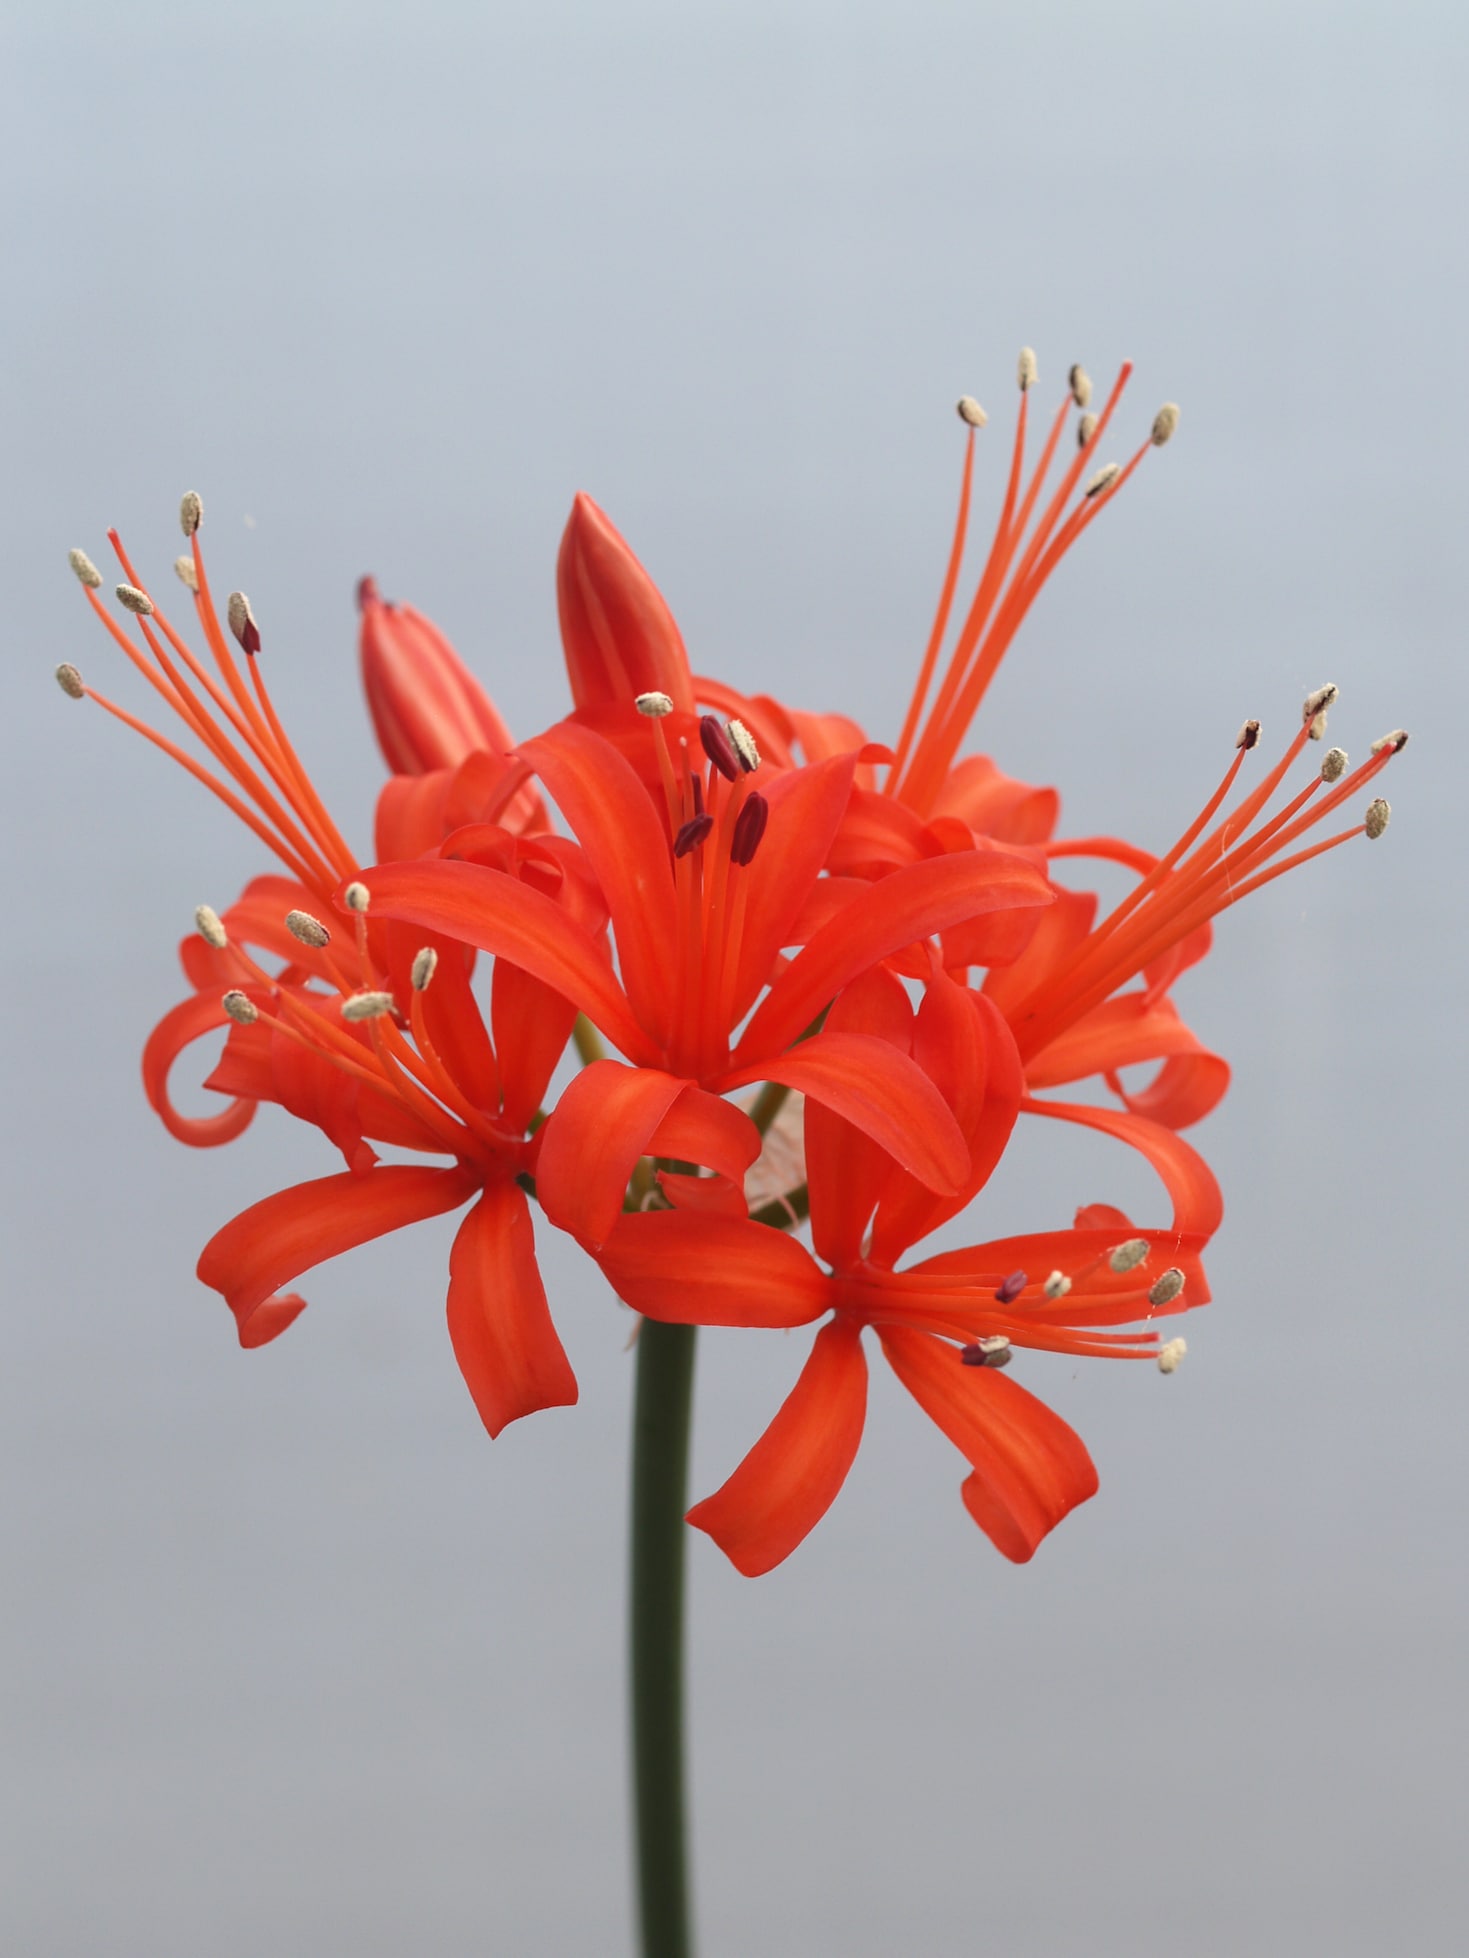 National collection of Nerines - Cotswold Garden Flowers